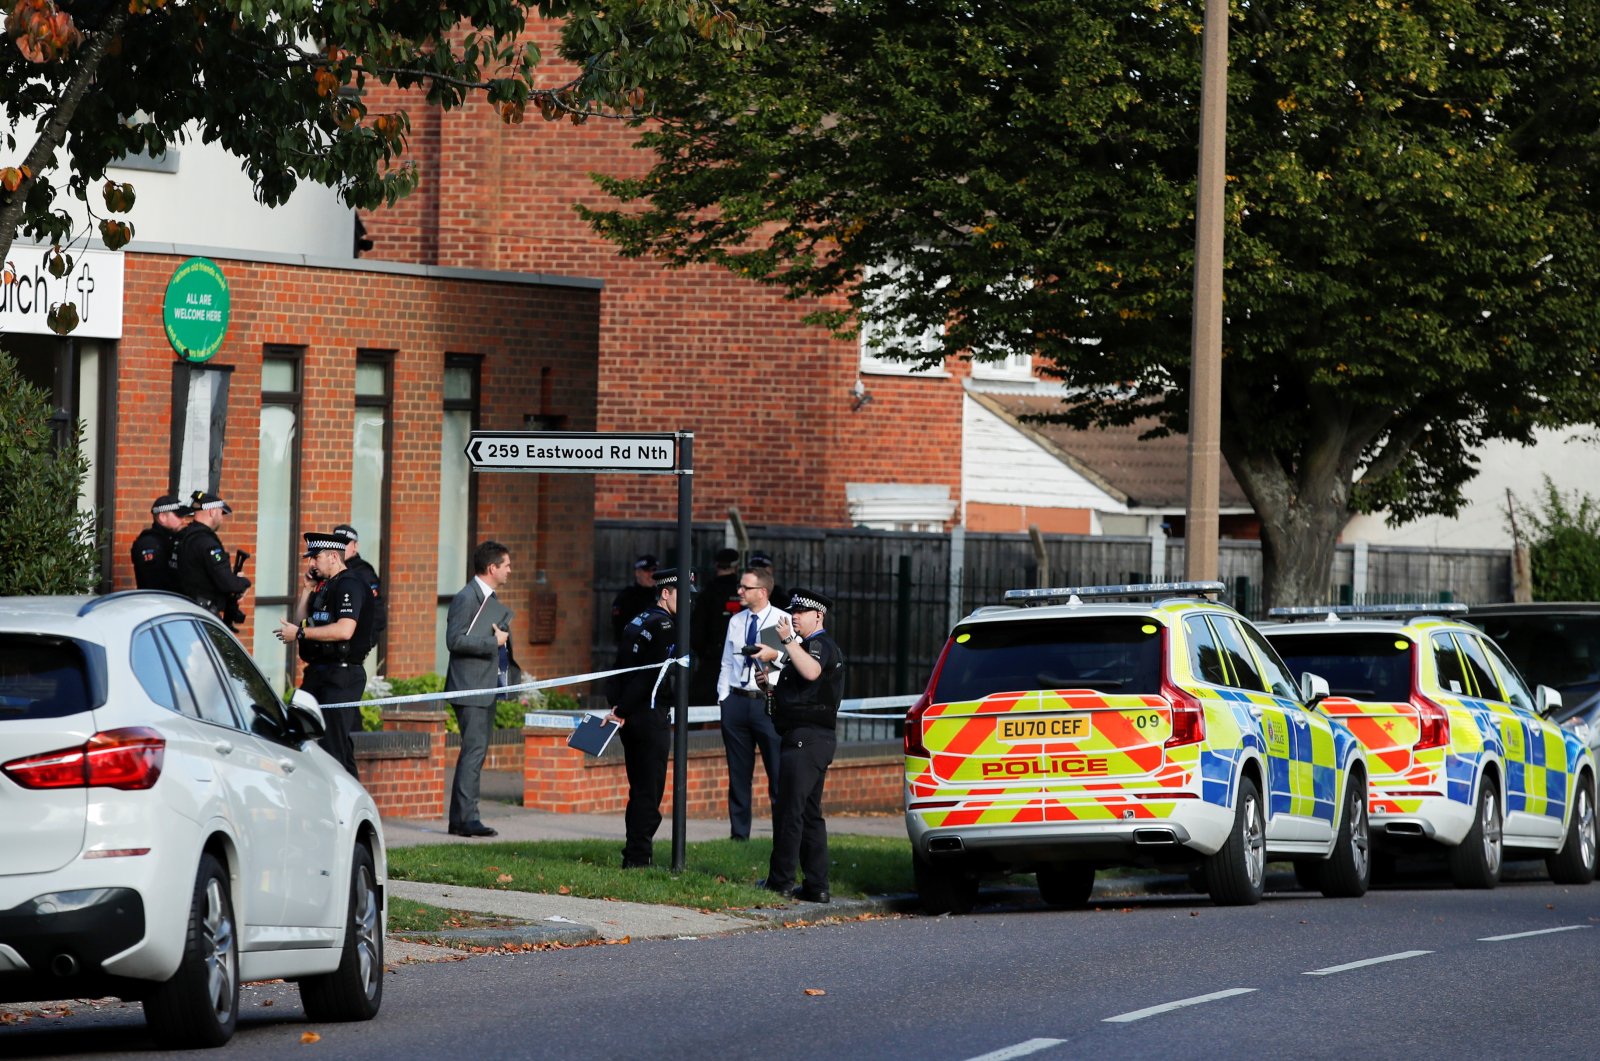 Police are seen at the scene where lawmaker David Amess was stabbed during a constituency surgery, in Leigh-on-Sea, Britain, Oct. 15, 2021. (Reuters Photo)